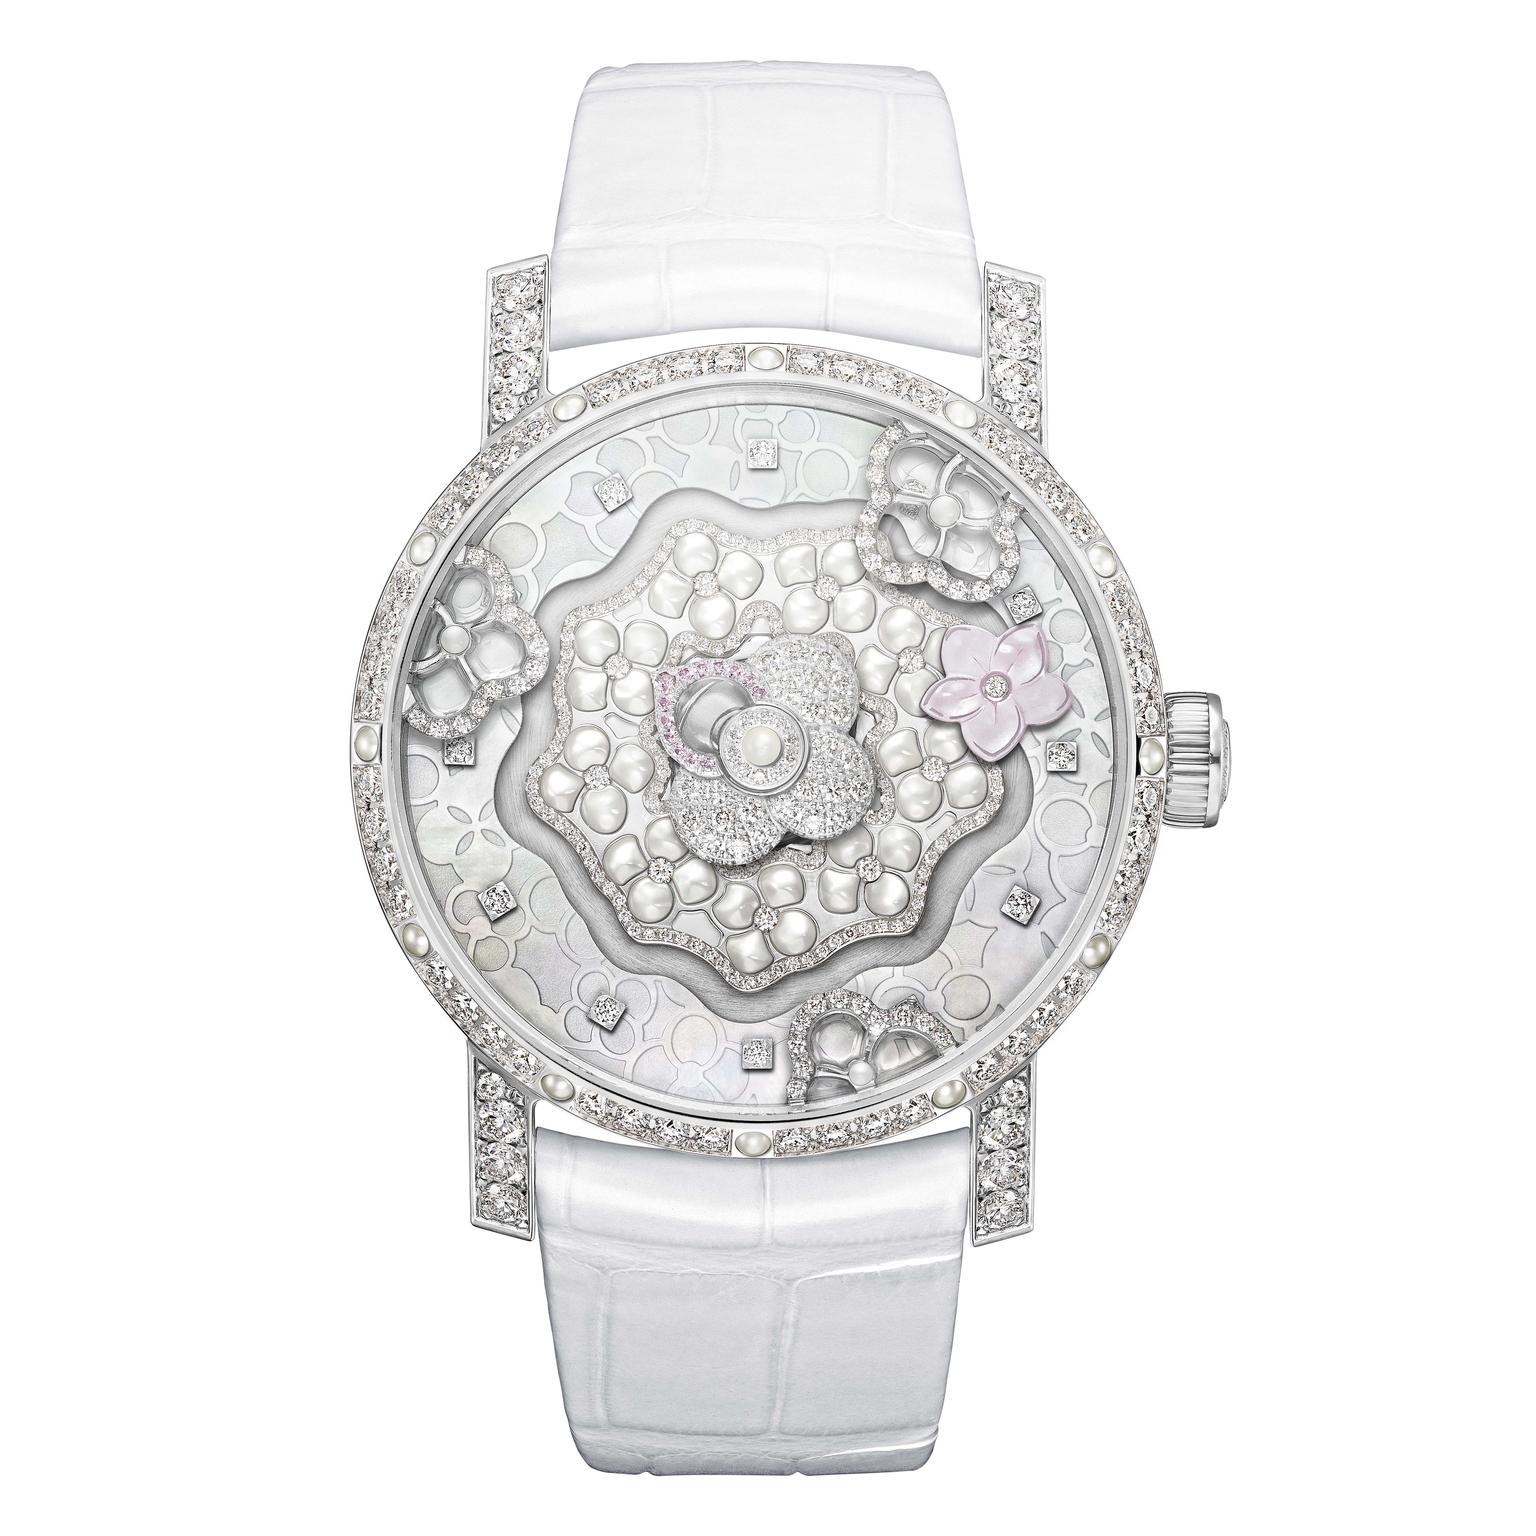 The new Chaumet Hortensia Creative Complication ladies' watch houses an exclusive Swiss automatic movement, and involved the work of countless artisans to sculpt the mother-of-pearl dial, engrave the 41mm white gold case, and set the diamonds.